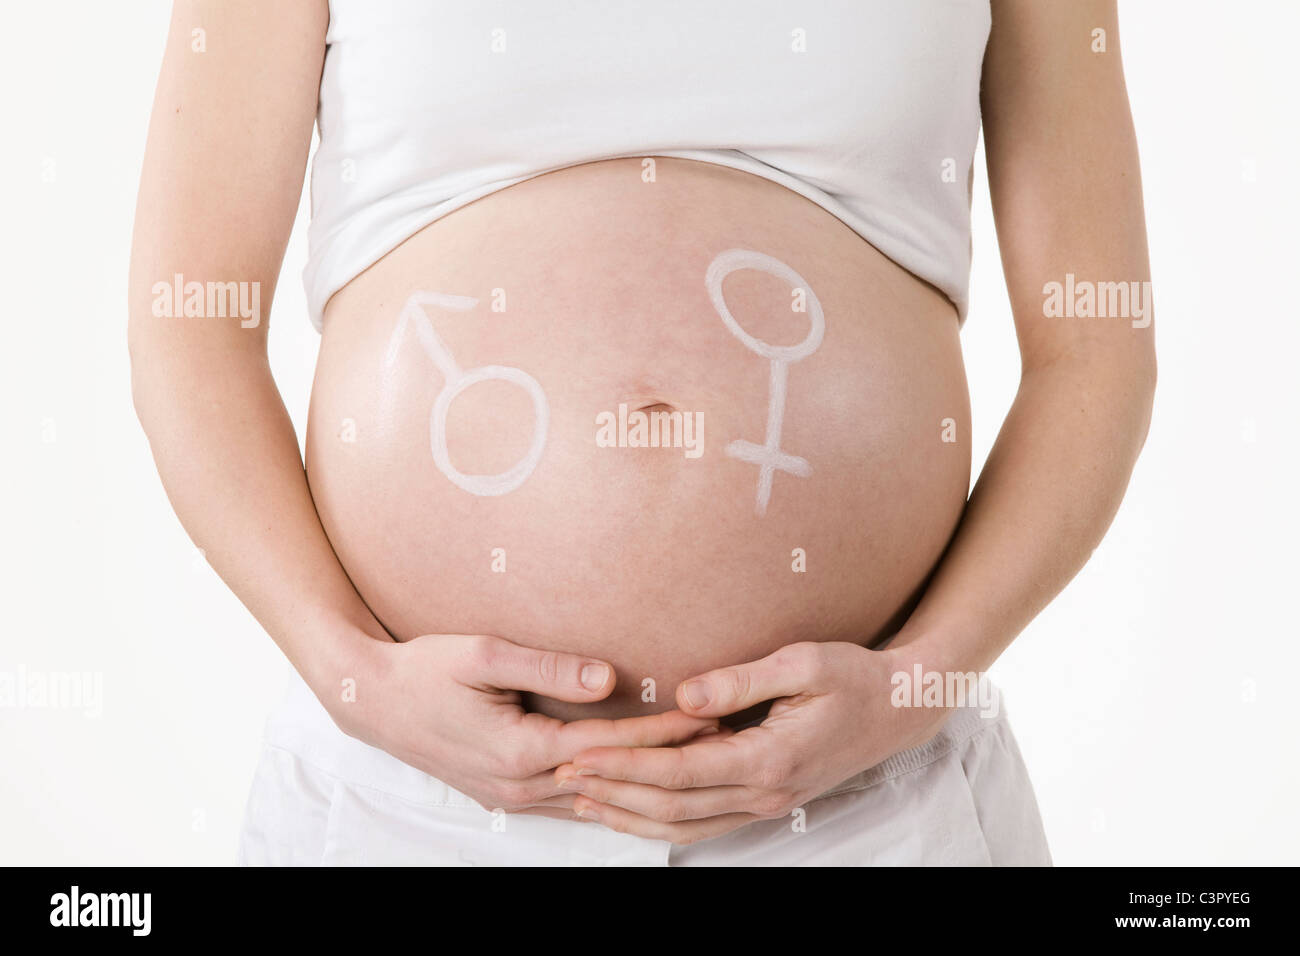 Male and female symbol drawn on a pregnant woman's belly, midsection Stock Photo